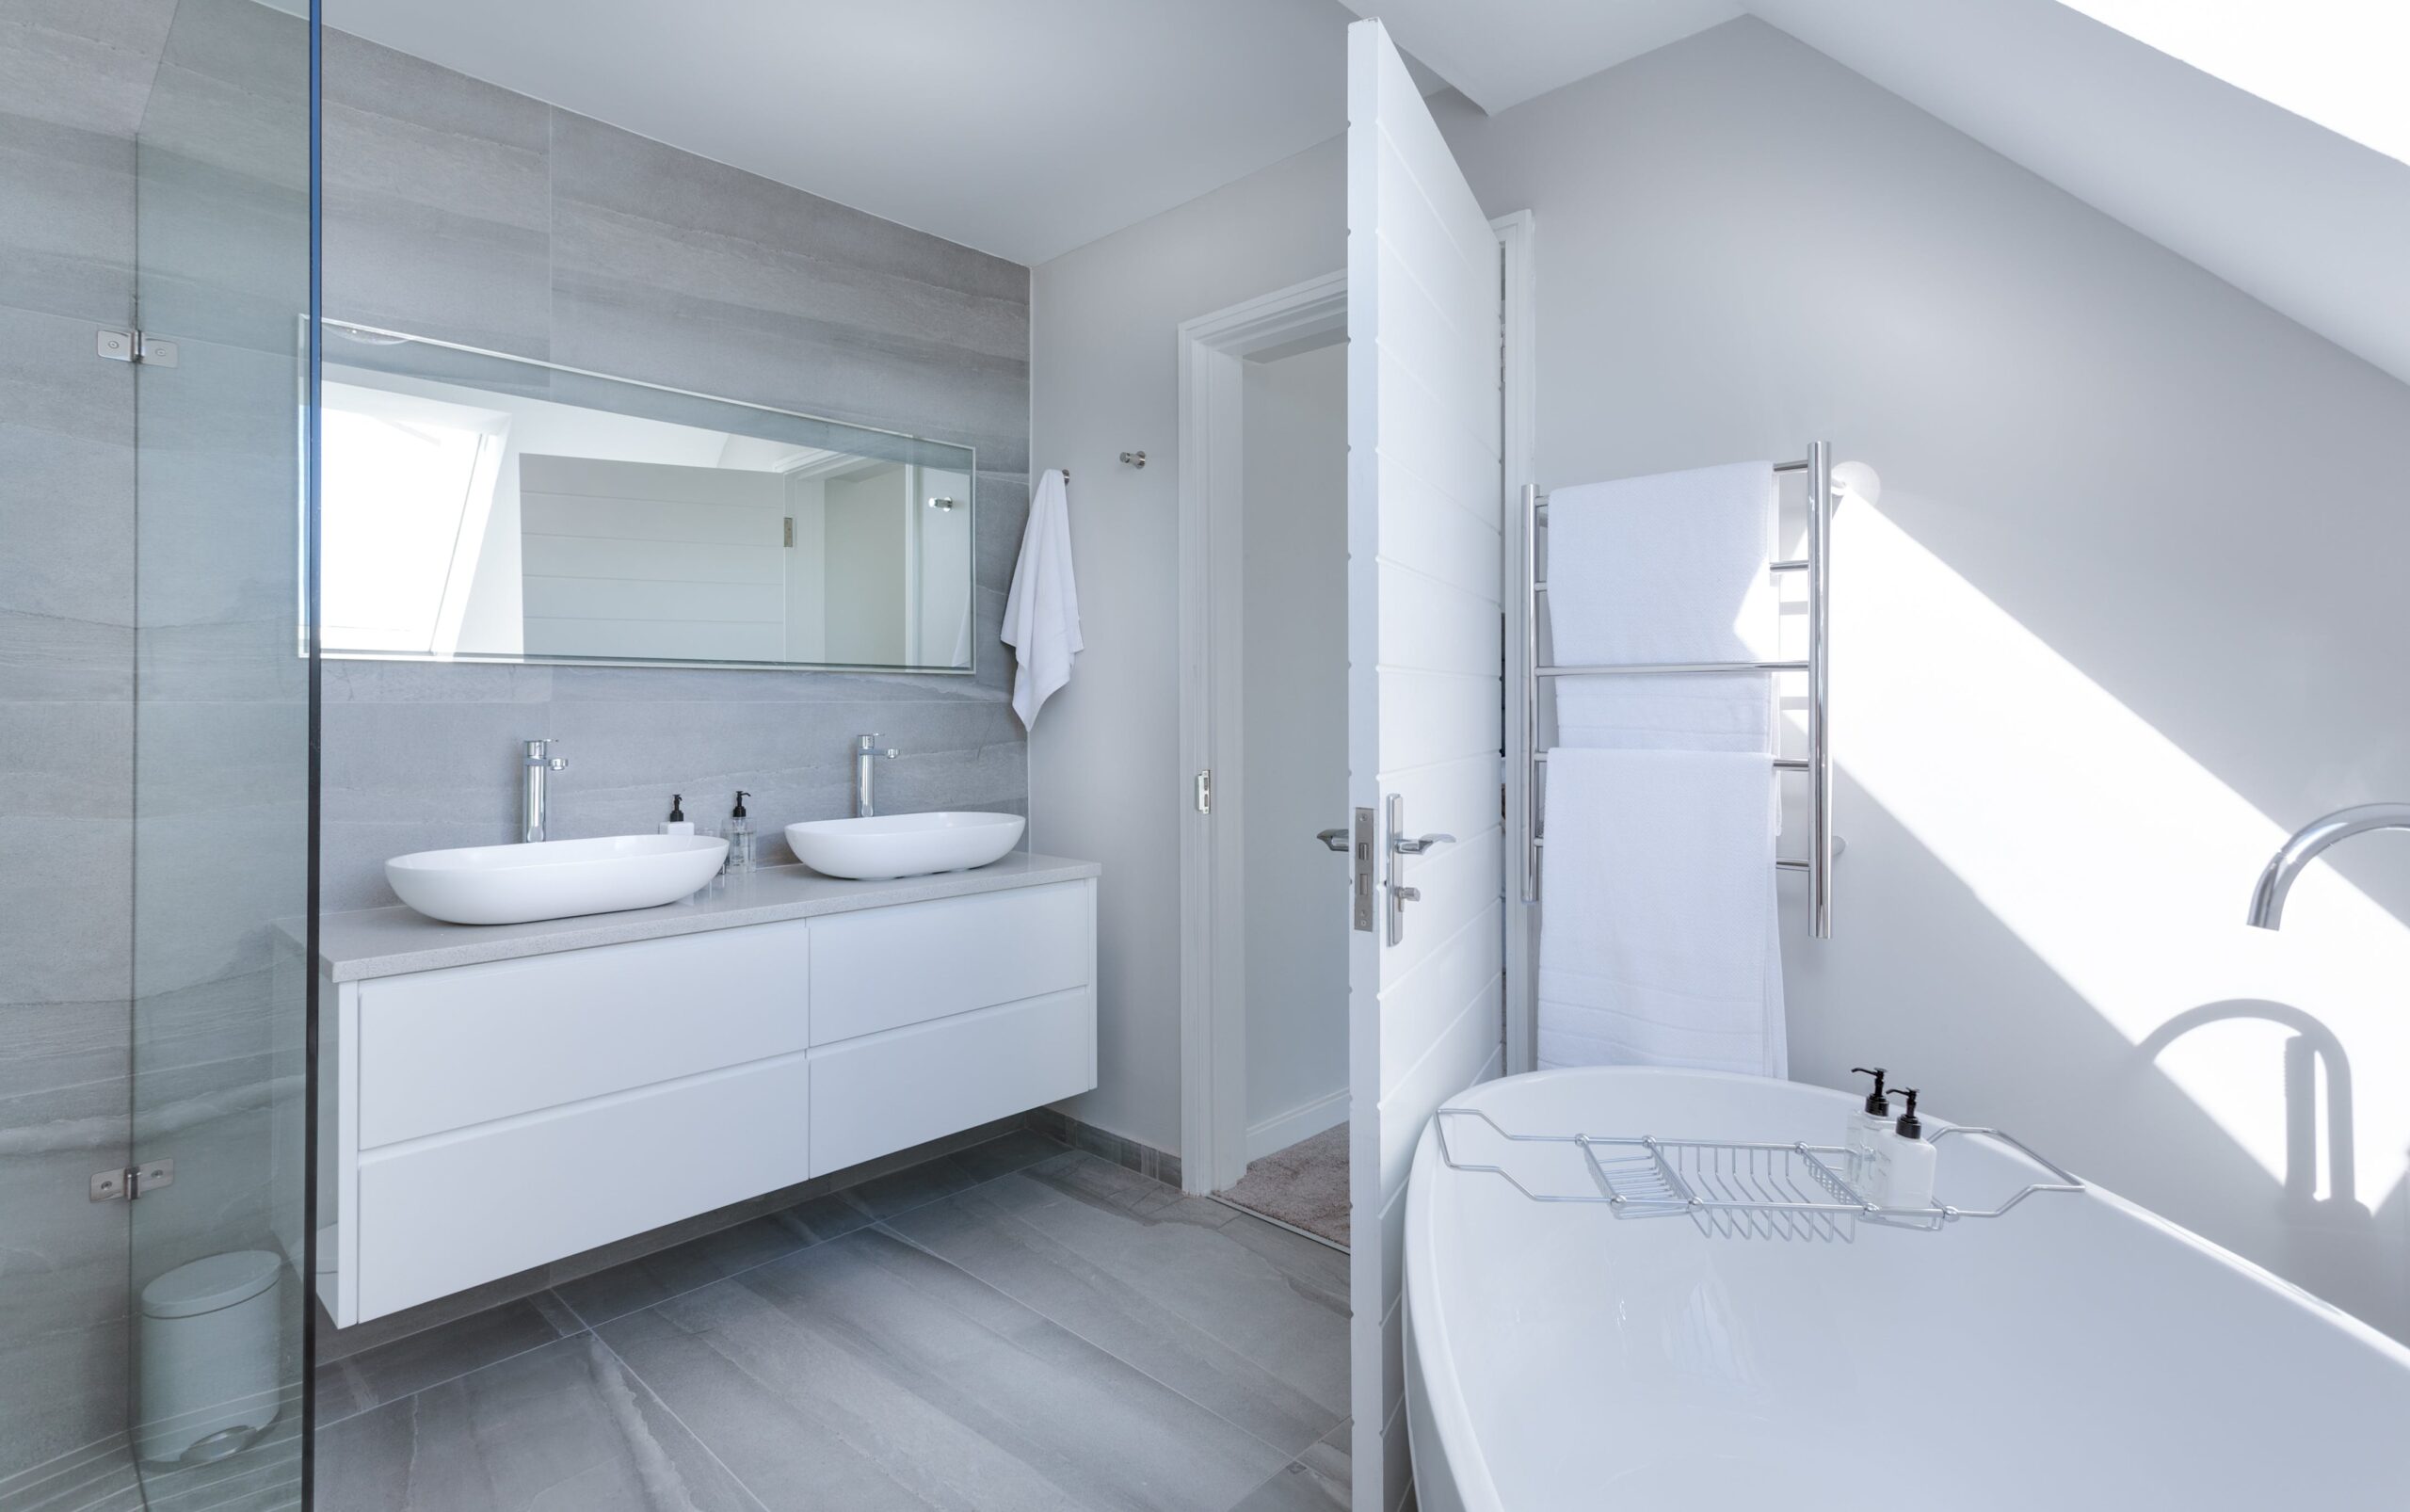 Revamp Your Bathroom Space with Top-notch Handyman Services in Fargo